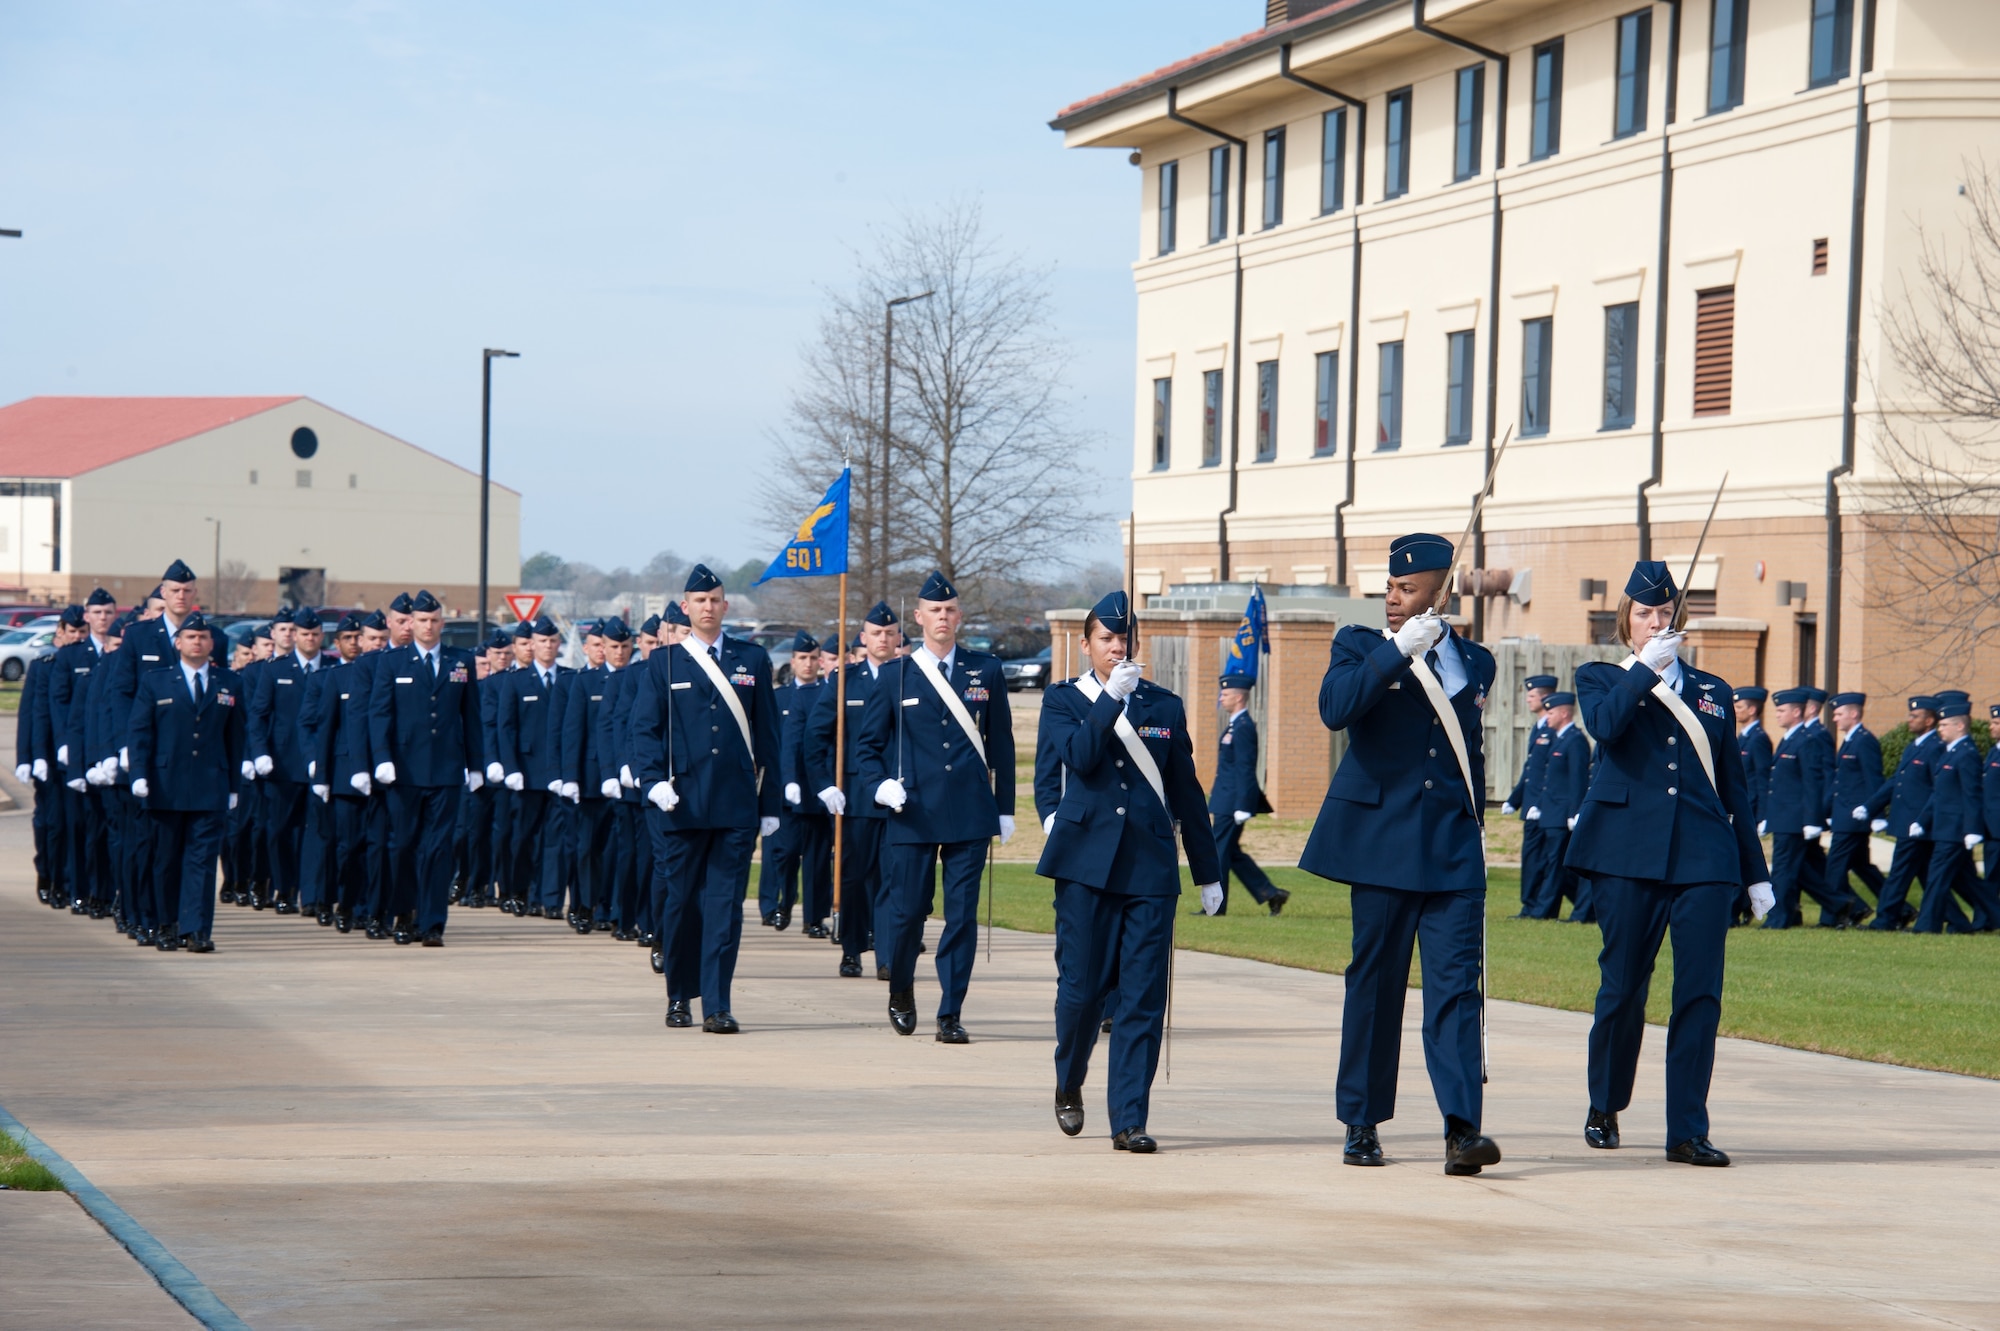 Basic Officer Training Course class 12-03 completes their graduation parade, with the two distinguished alumni reviewing the graduates Feb. 17. An A-10 flyover paid tribute to Johnson, a command A-10 pilot. (Air Force photo/Melanie Rodgers Cox)